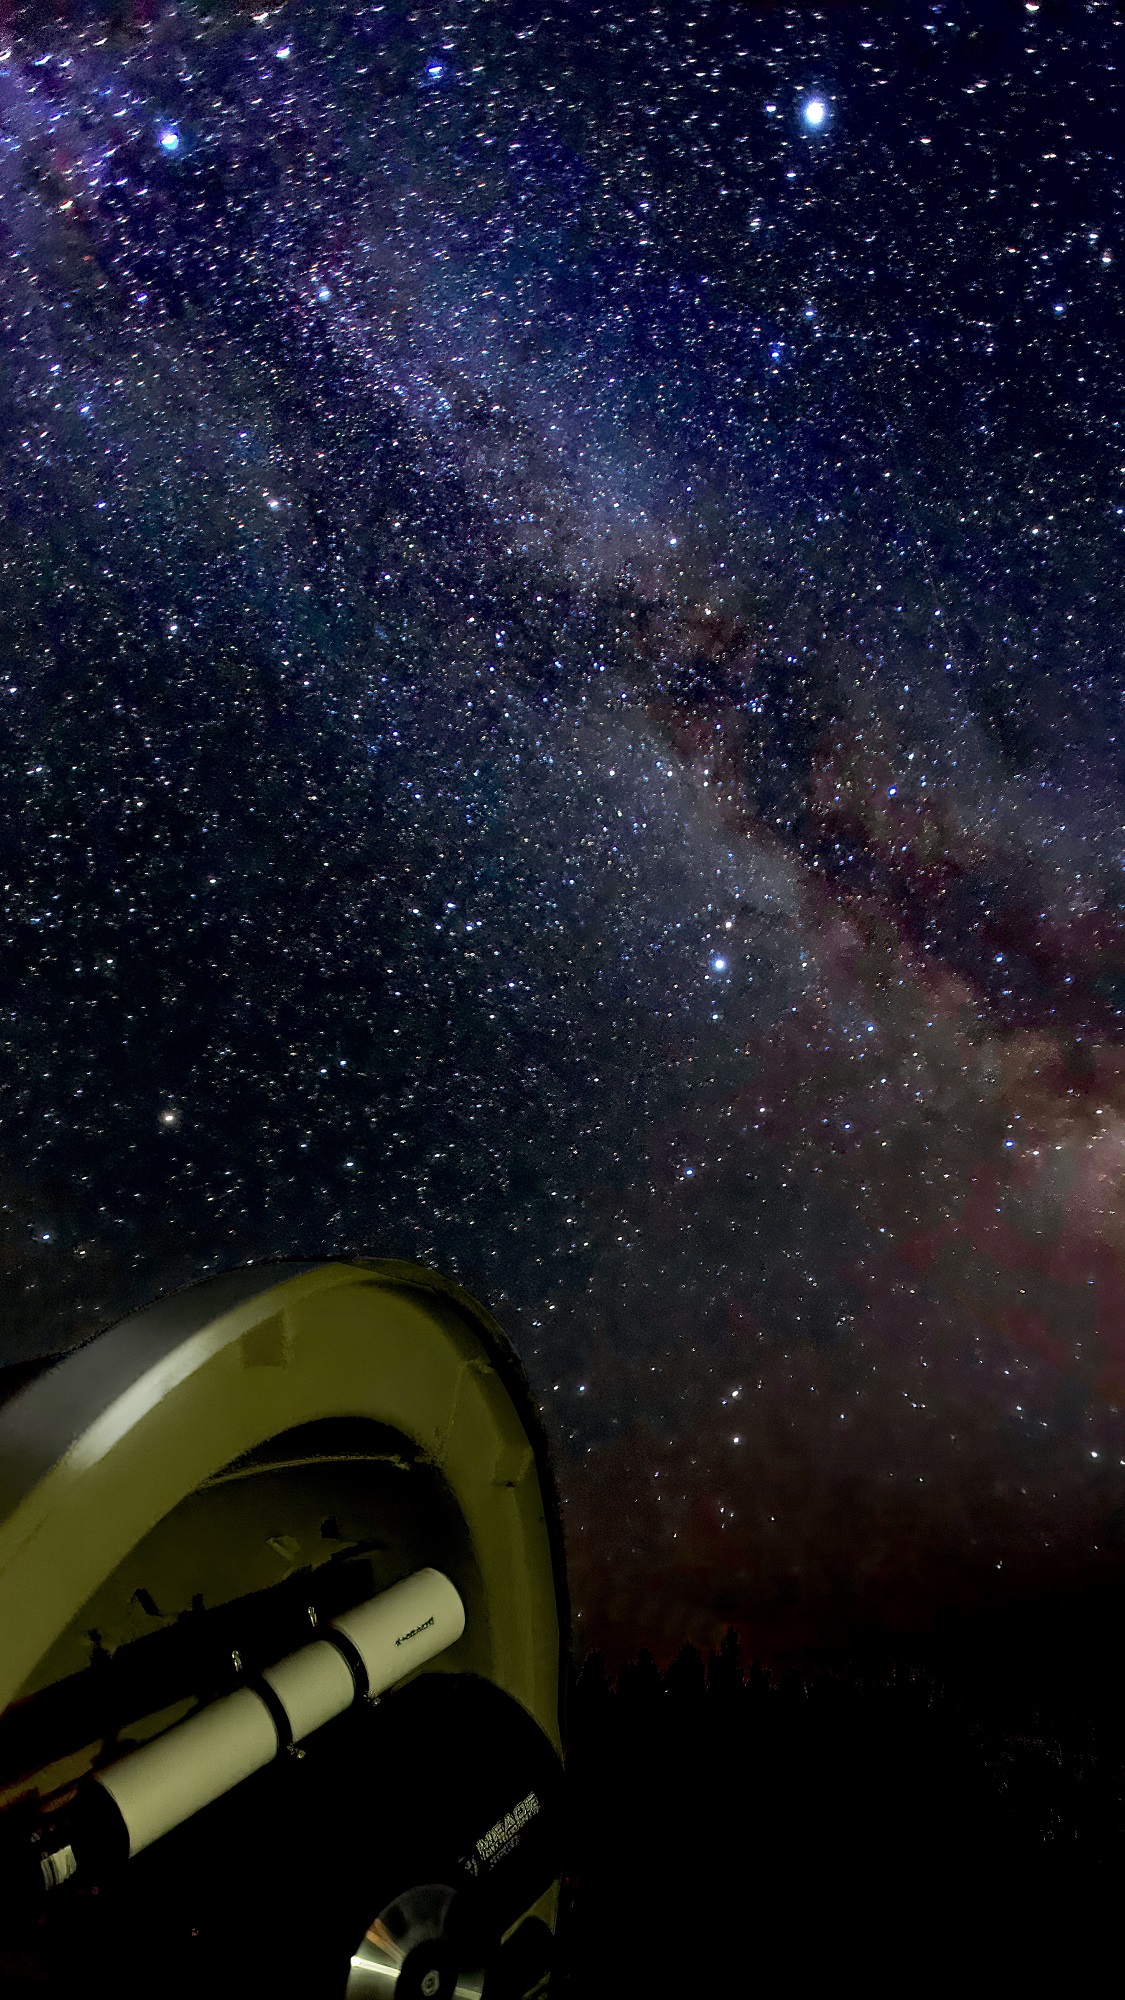 telescope in foreground against starry sky with Milky Way